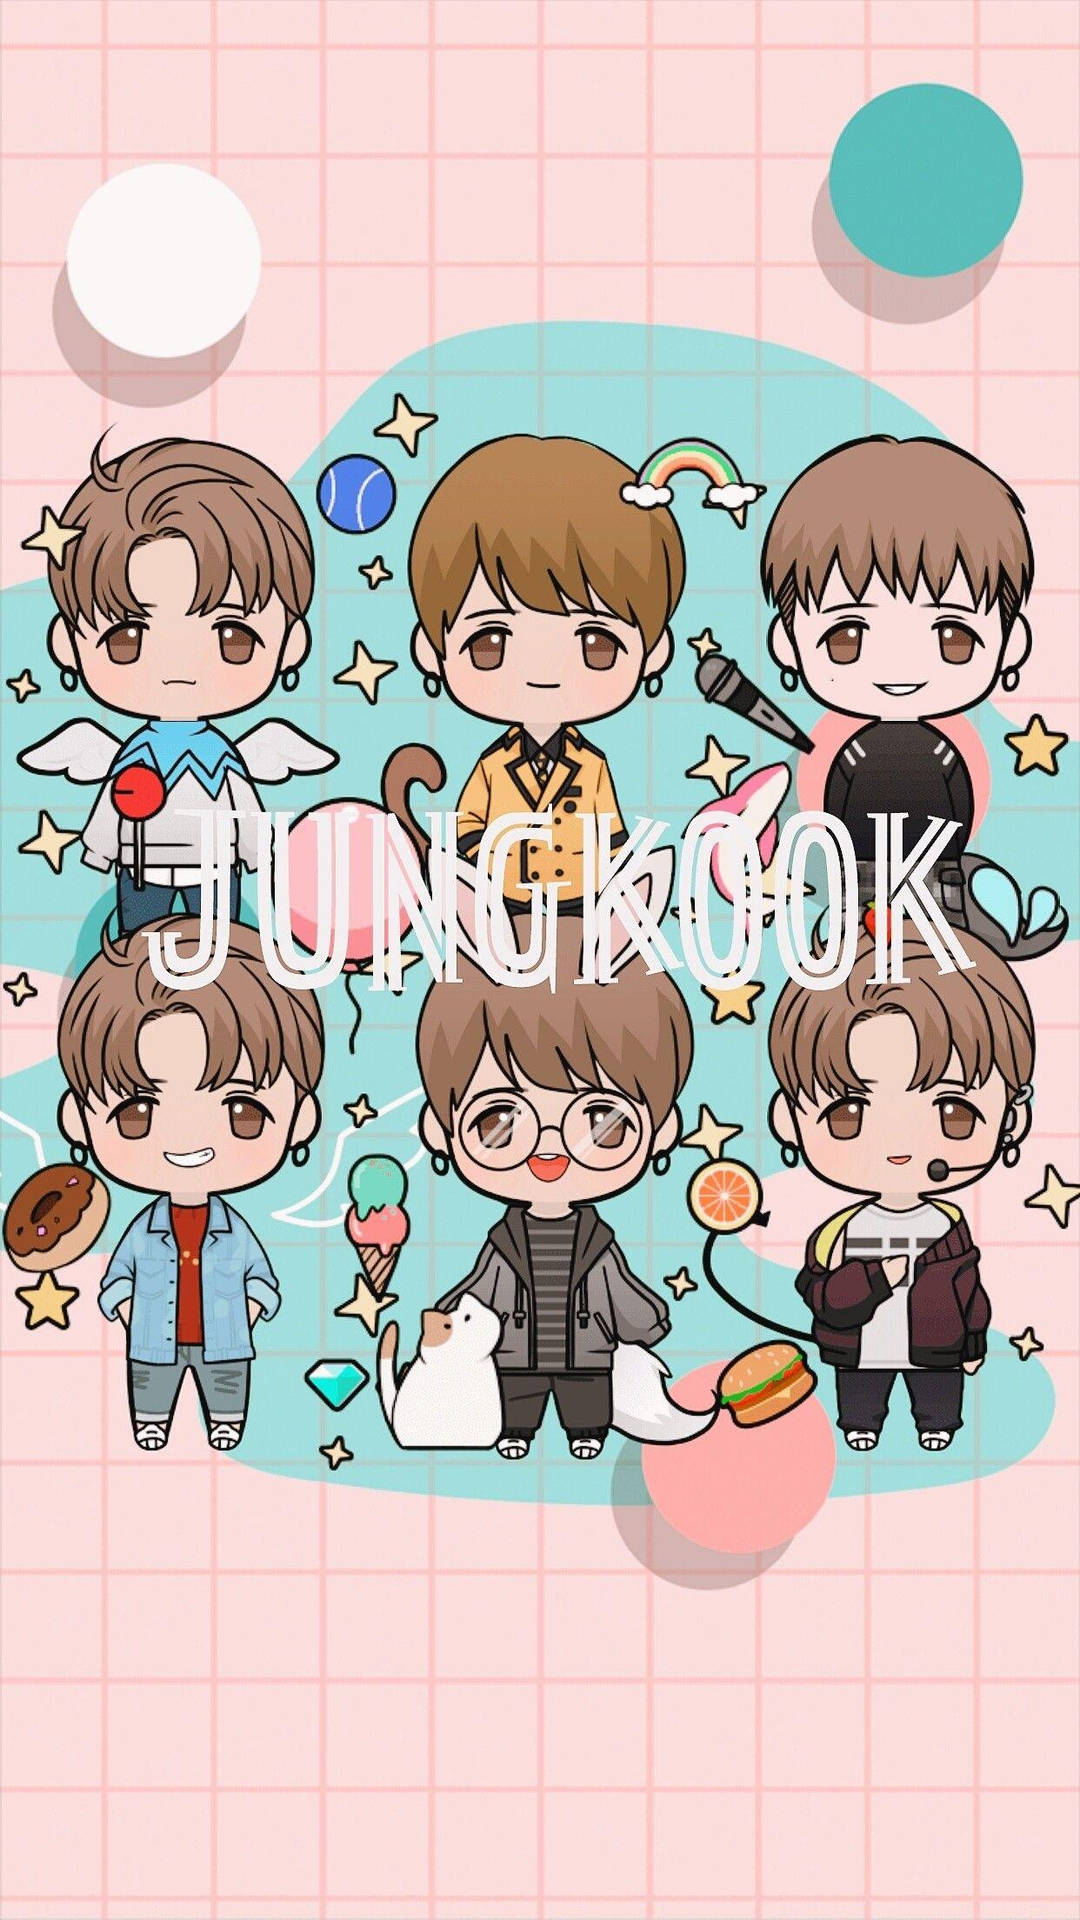 Endearing Anime Jungkook Of Bts Background